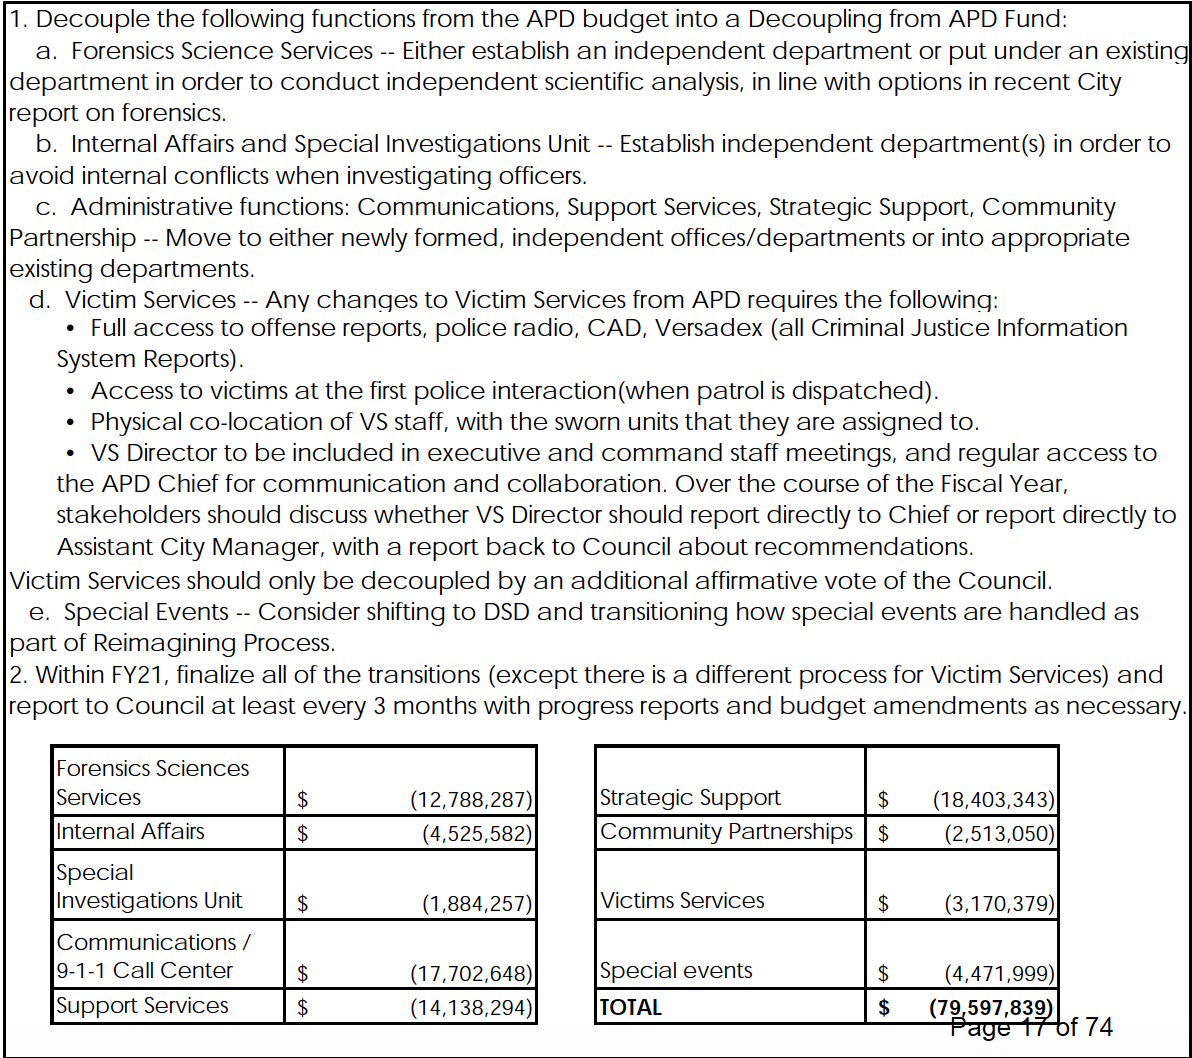 Another ~$80 million comes from moving divisions under APD into other offices or standalone depts. This includes Internal Affairs, 9-1-1 Call Center and Victim Services (this last one will require another vote by council, TBD). I’ve screenshotted the actual amendment here: 5/